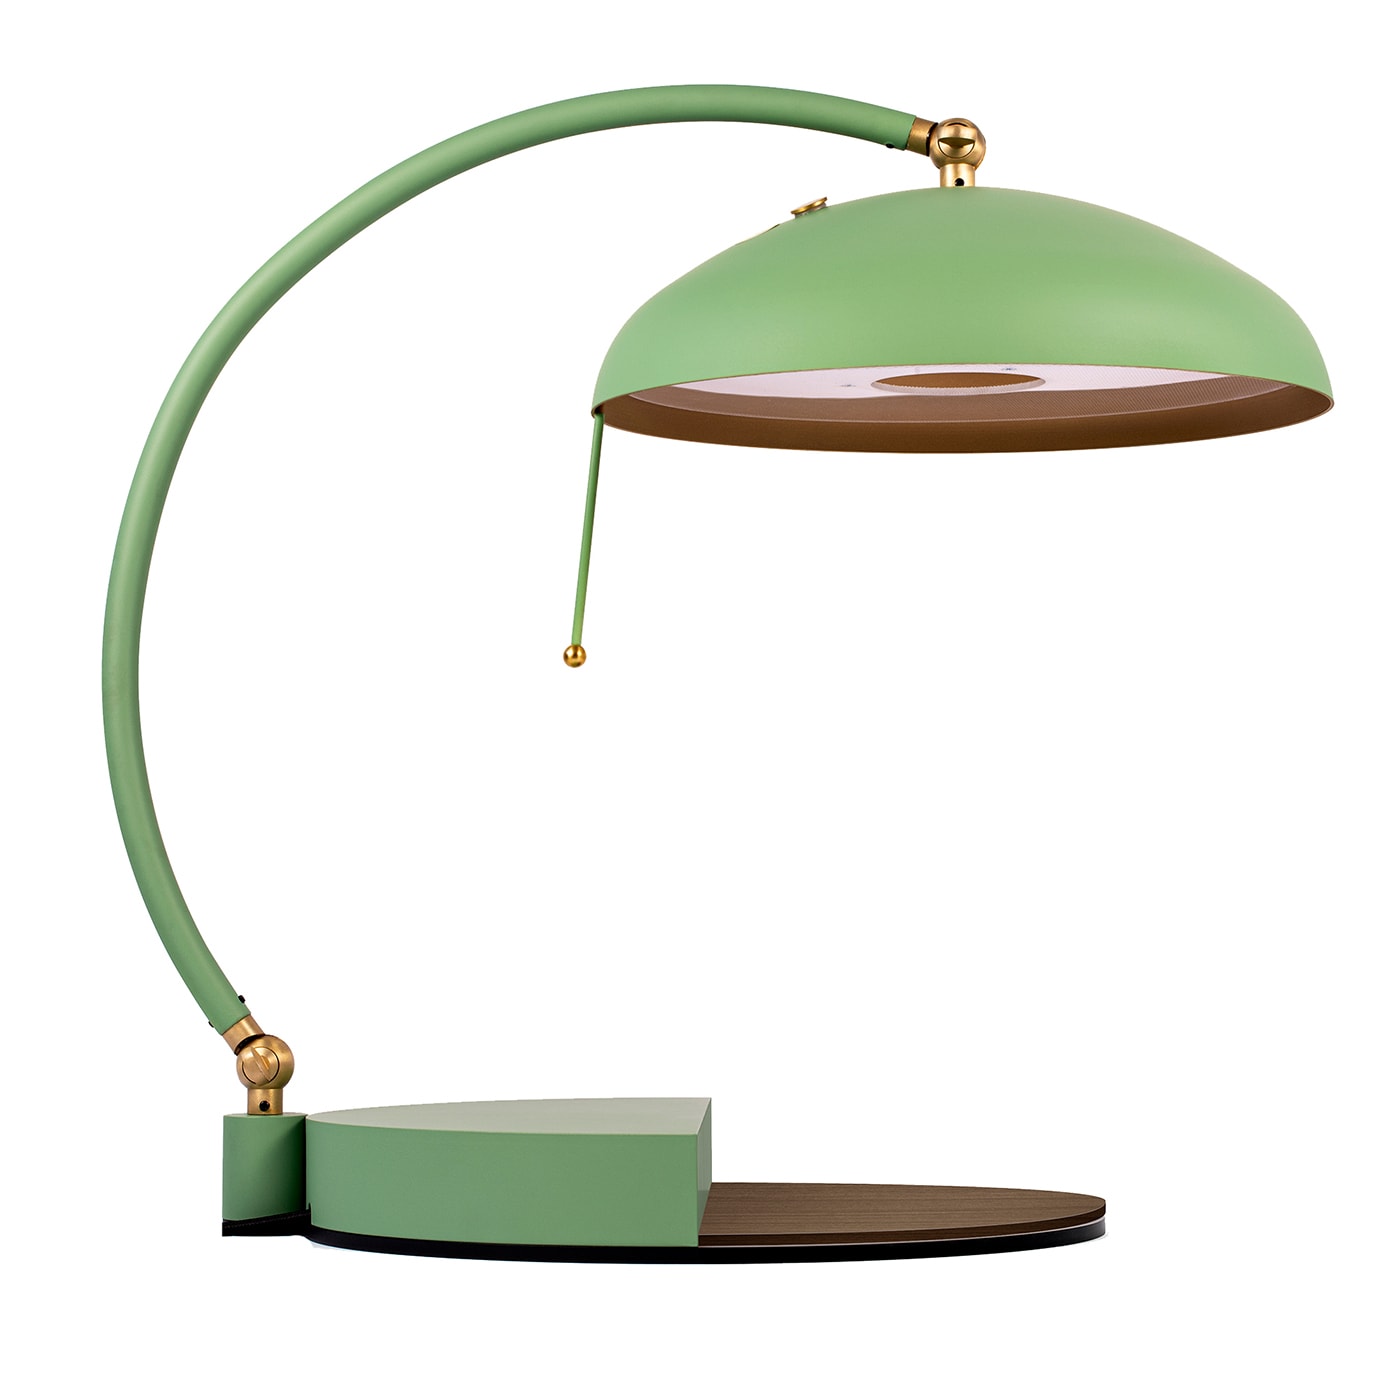 Serena Ministeriale Green Table Lamp with Walnut Wood Details - Codega